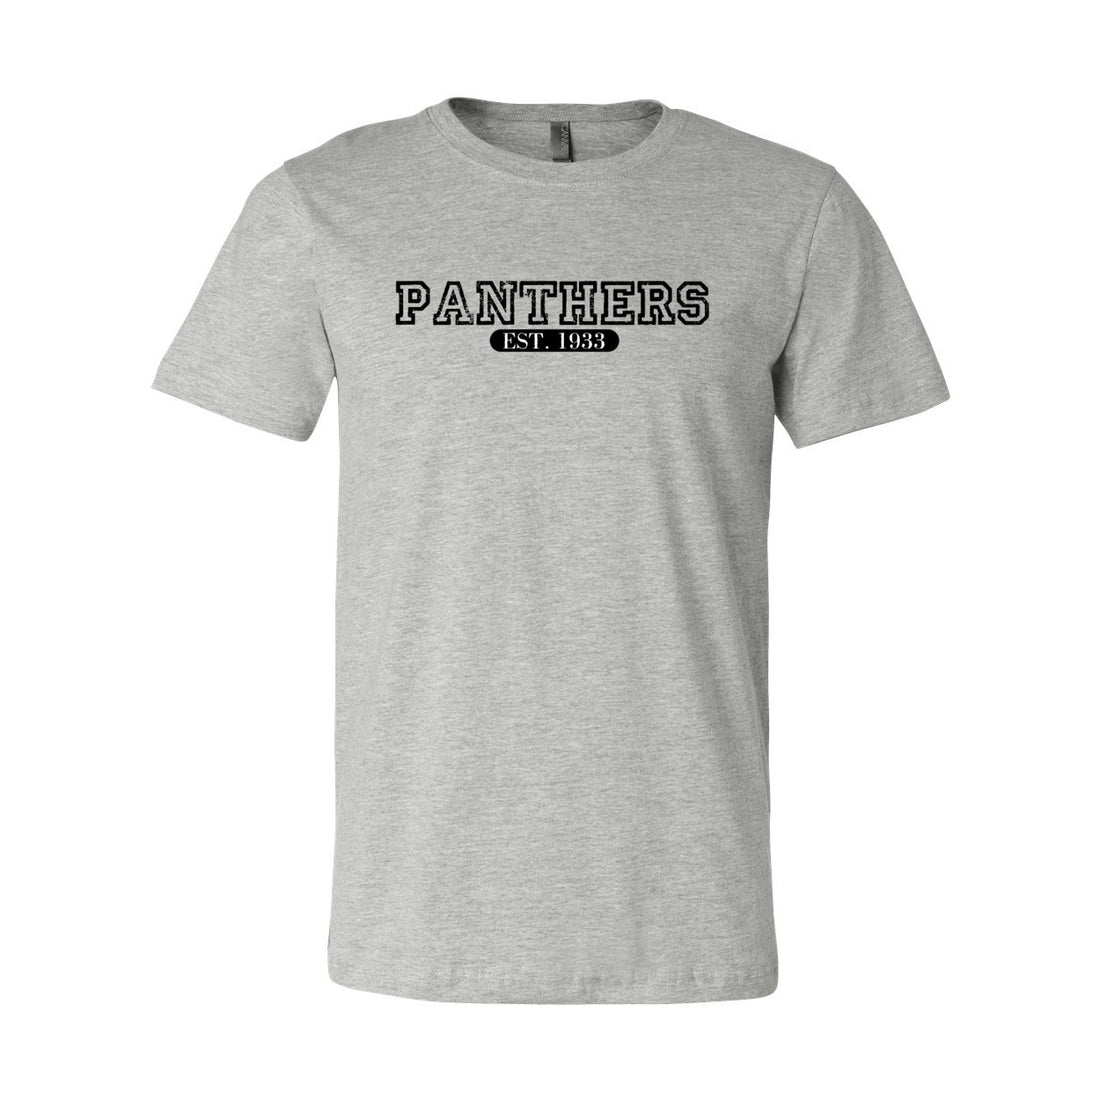 Panthers Est Short Sleeve Jersey Tee - T - Shirts - Positively Sassy - Panthers Est Short Sleeve Jersey Tee